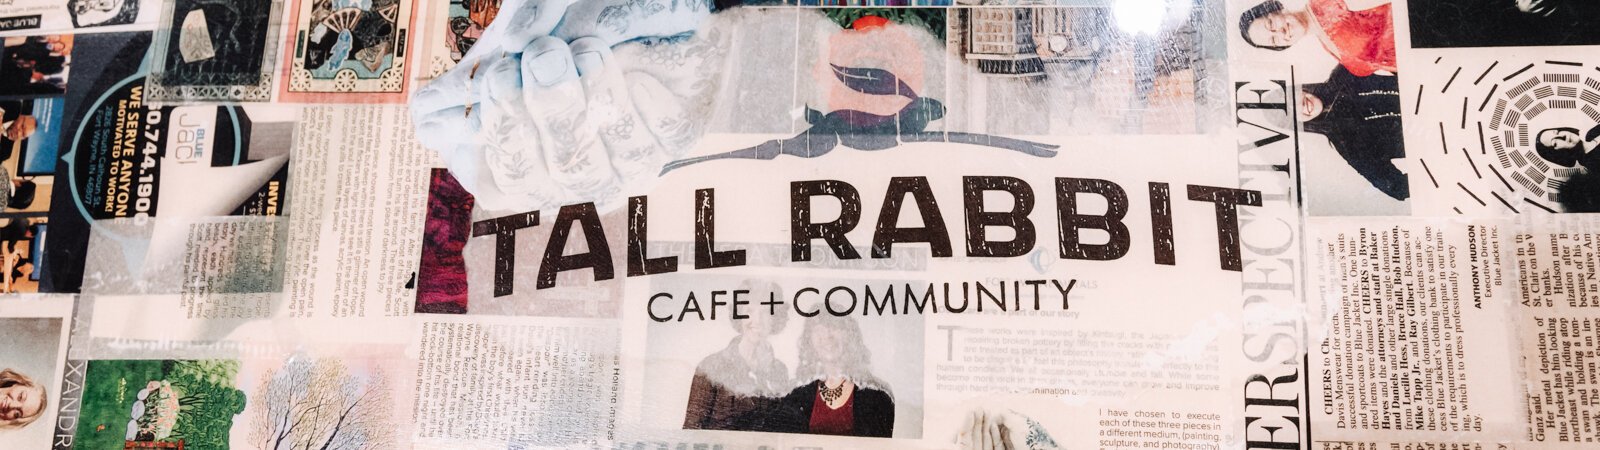 A table at Tall Rabbit Cafe + Community, 2001 Calhoun St. Fort Wayne, IN.